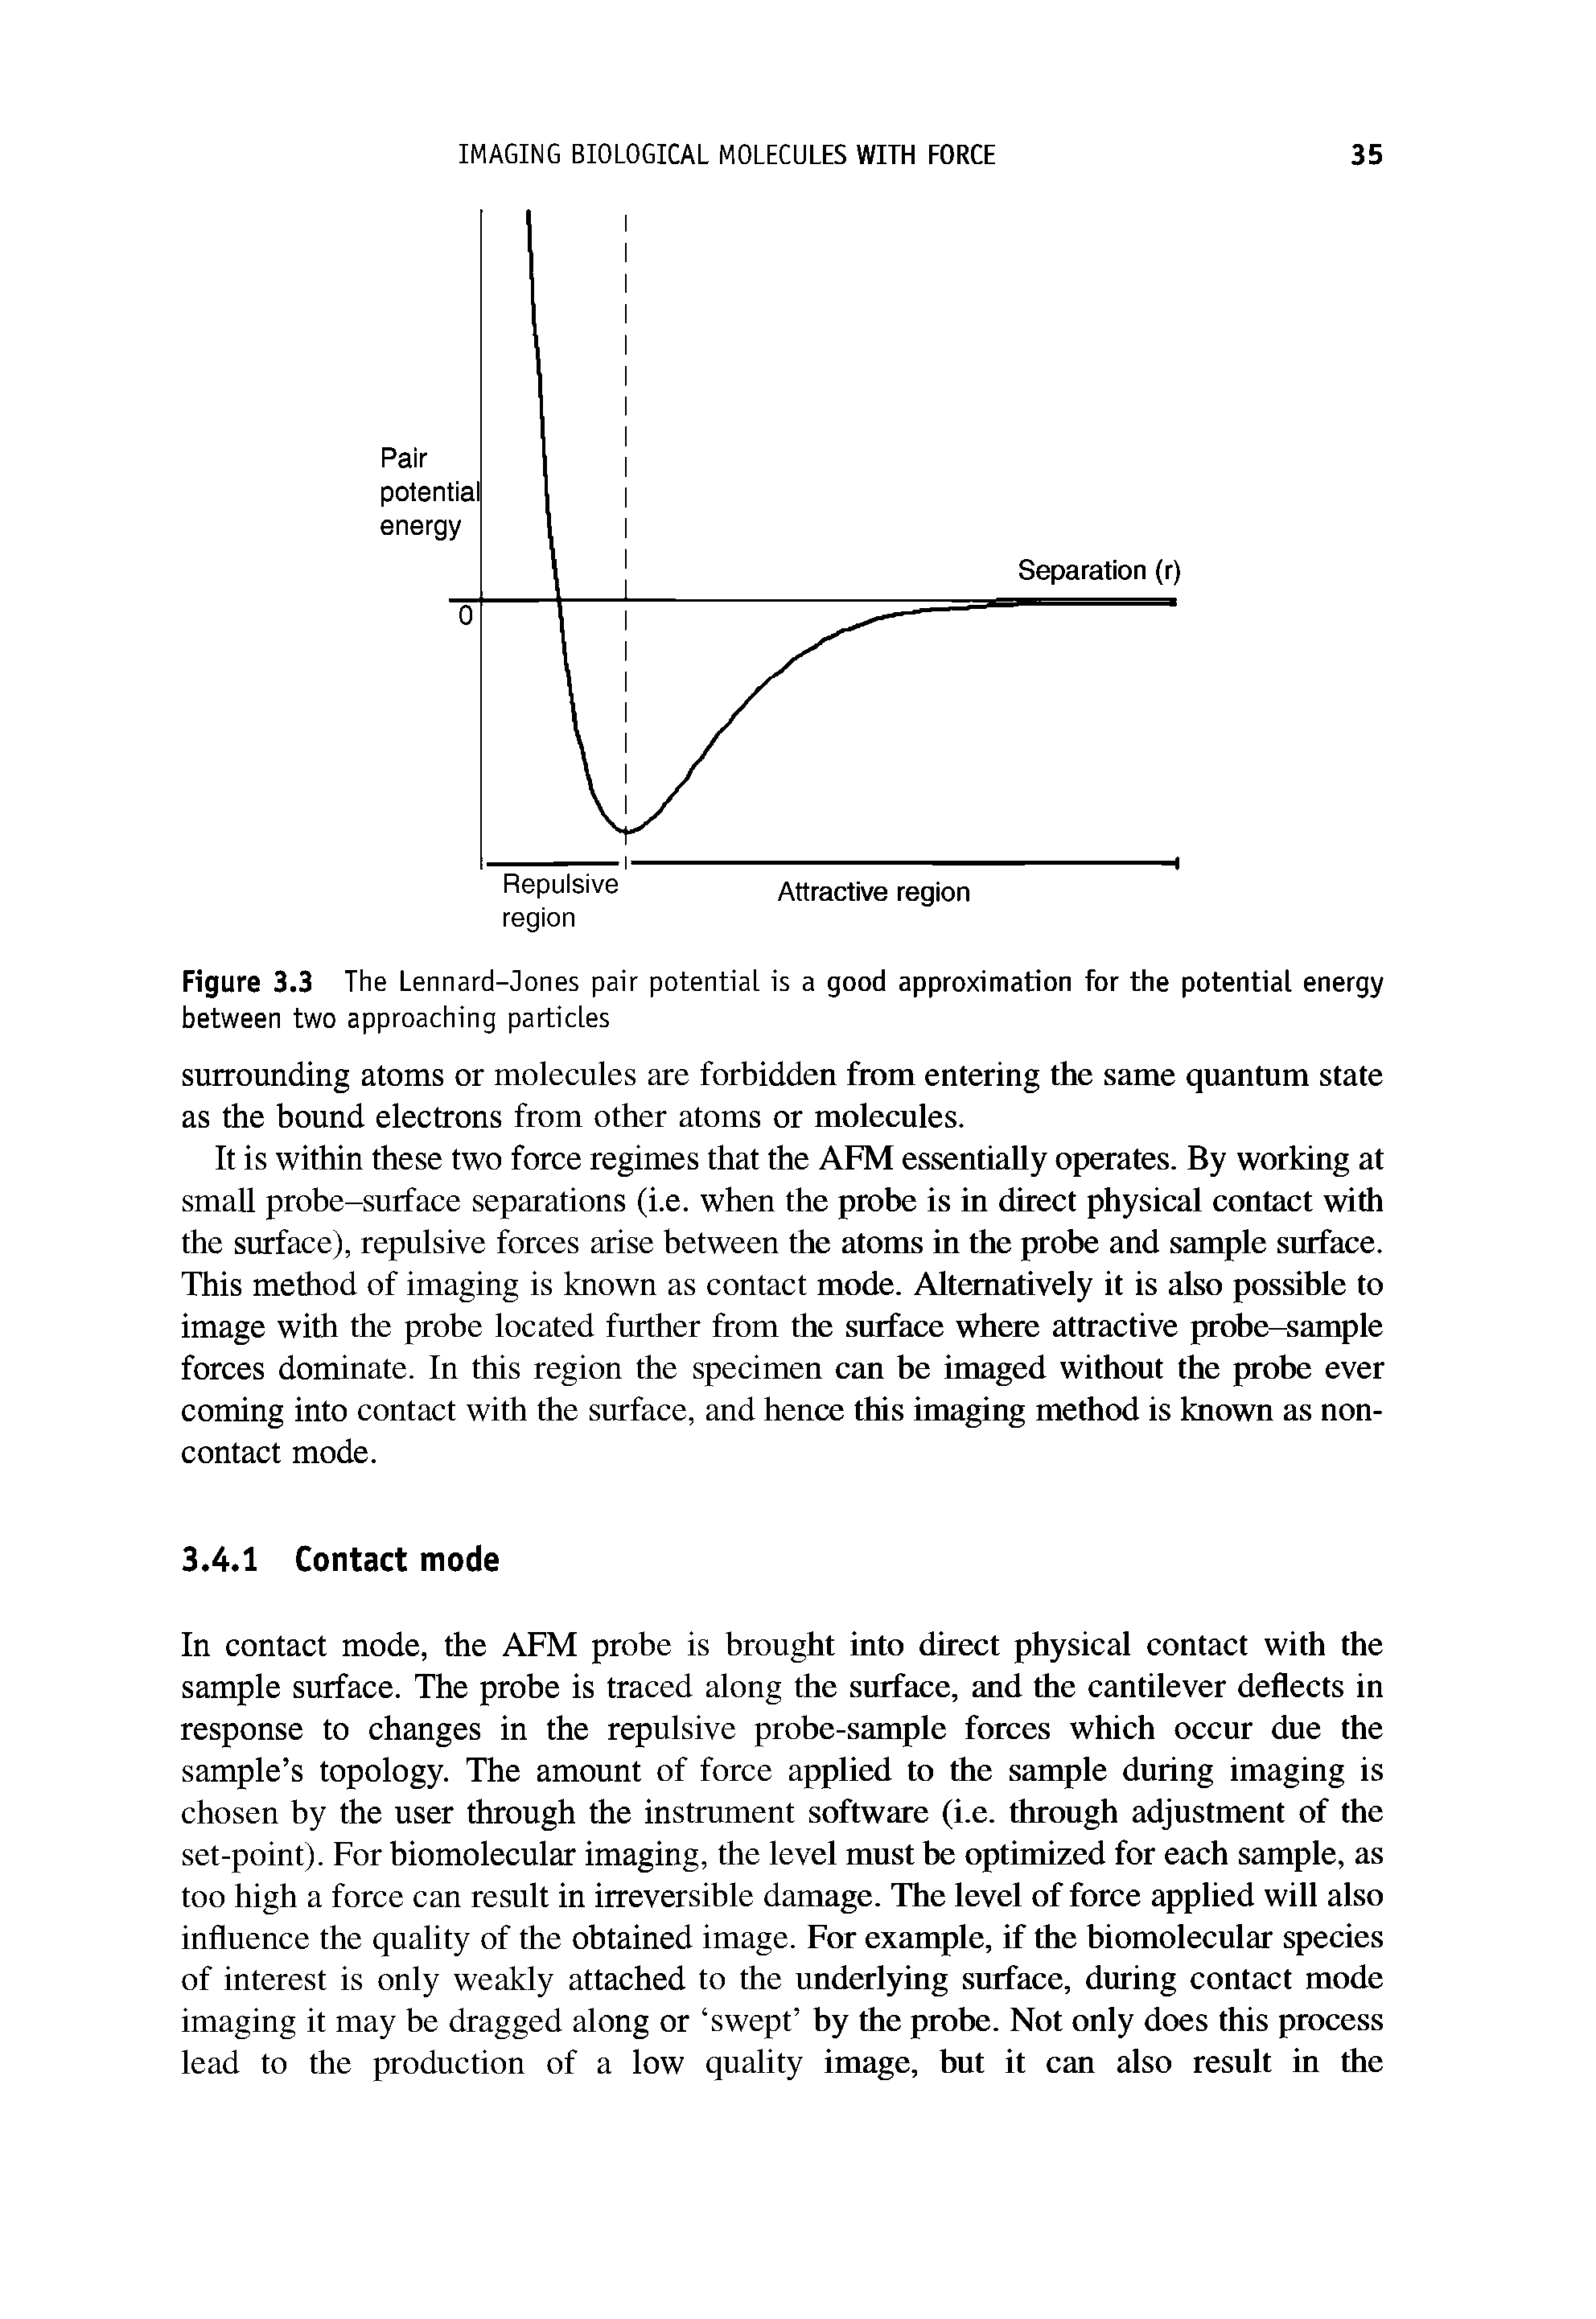 Figure 3.3 The Lennard-Jones pair potential is a good approximation for the potential energy between two approaching particles...